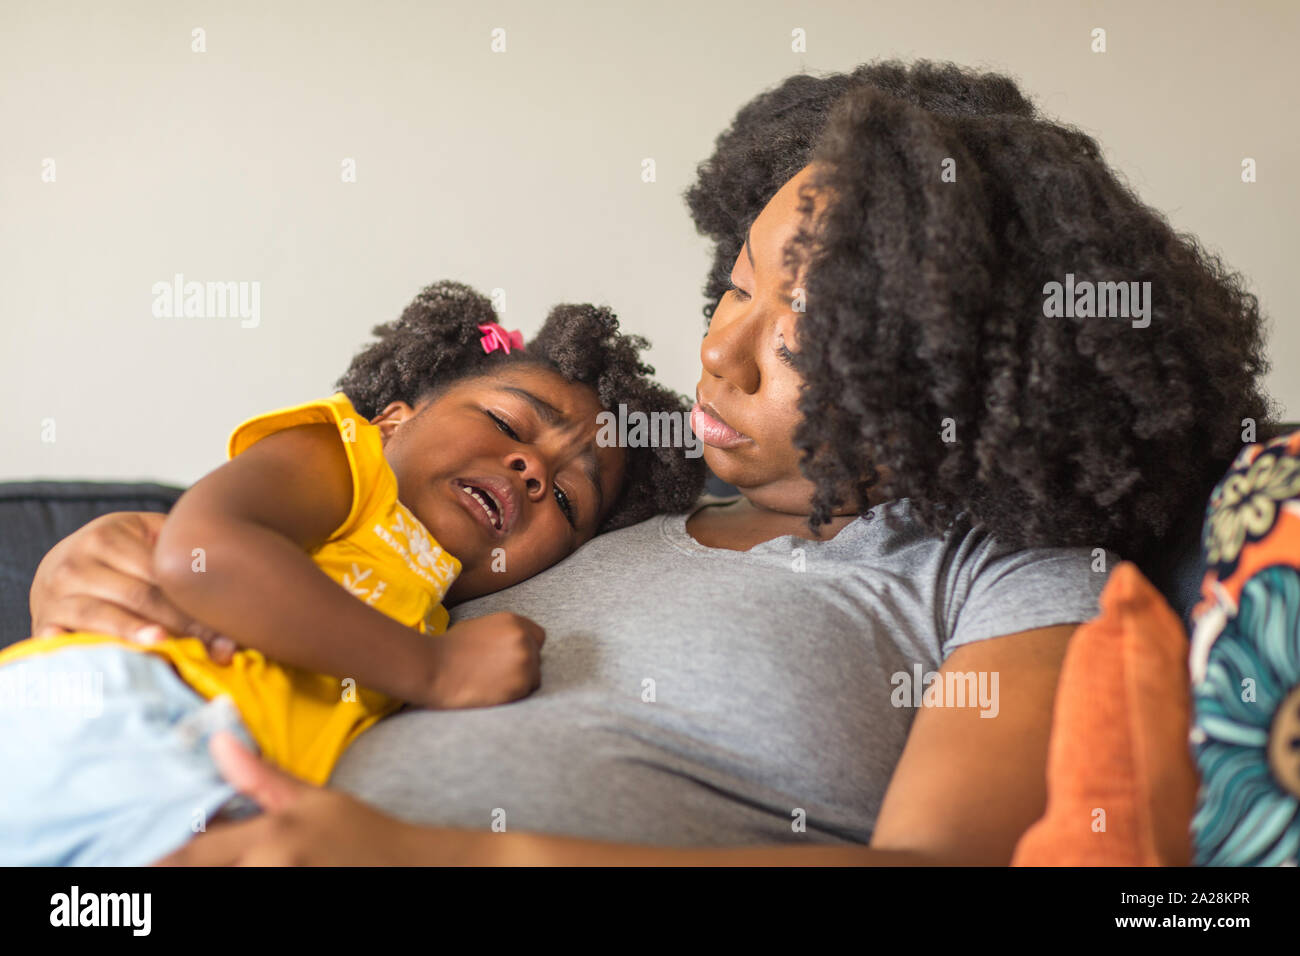 African American mother disciplining parenting her young child. Stock Photo